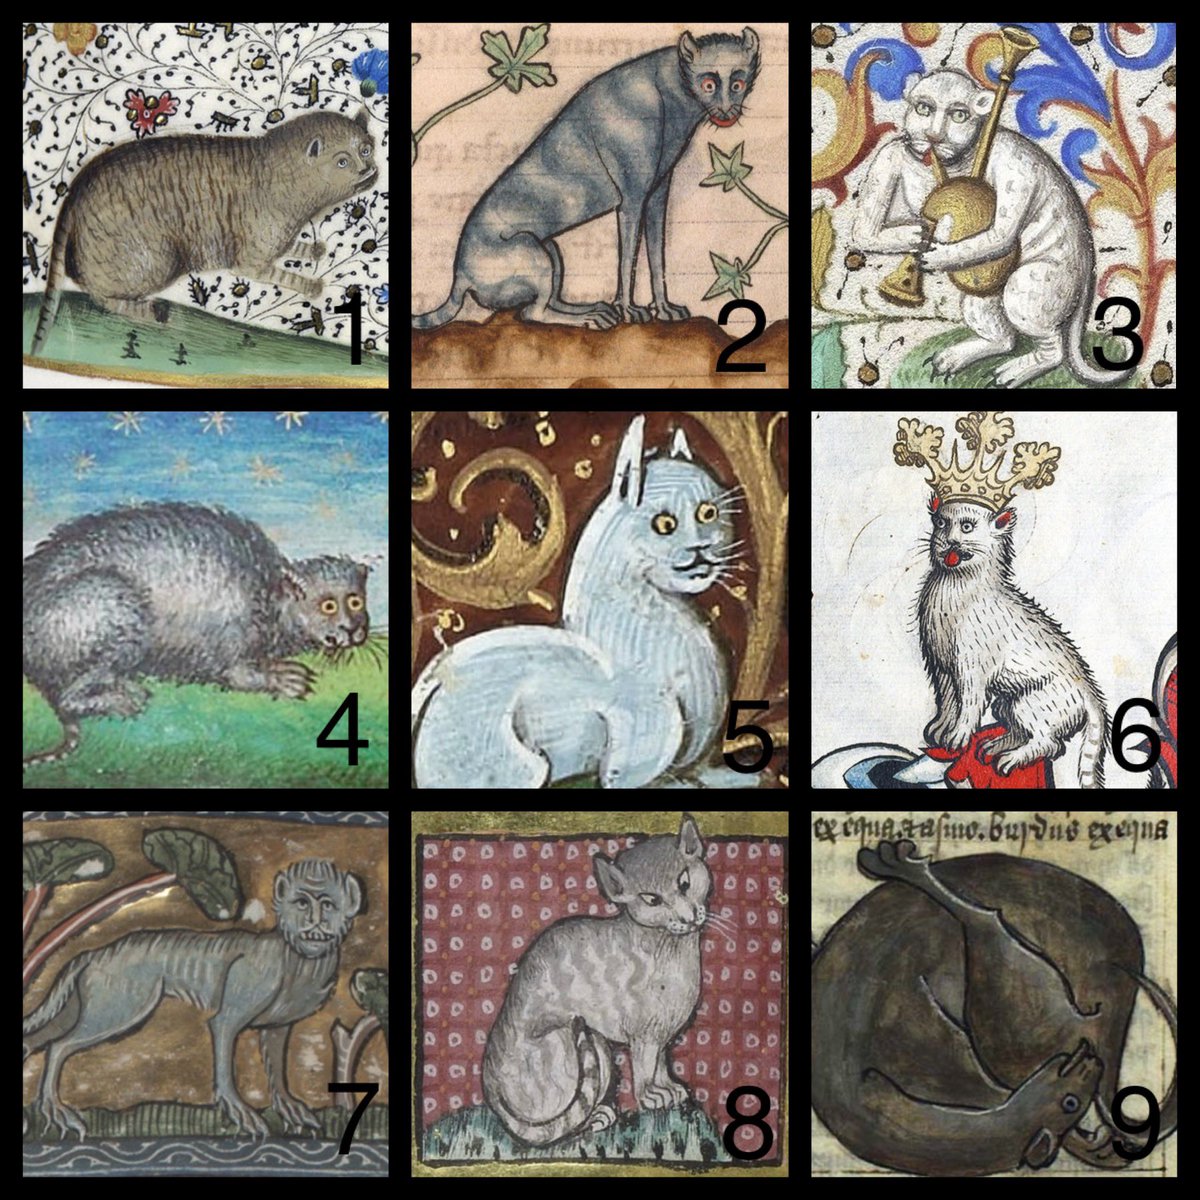 Which medieval cat are you today?